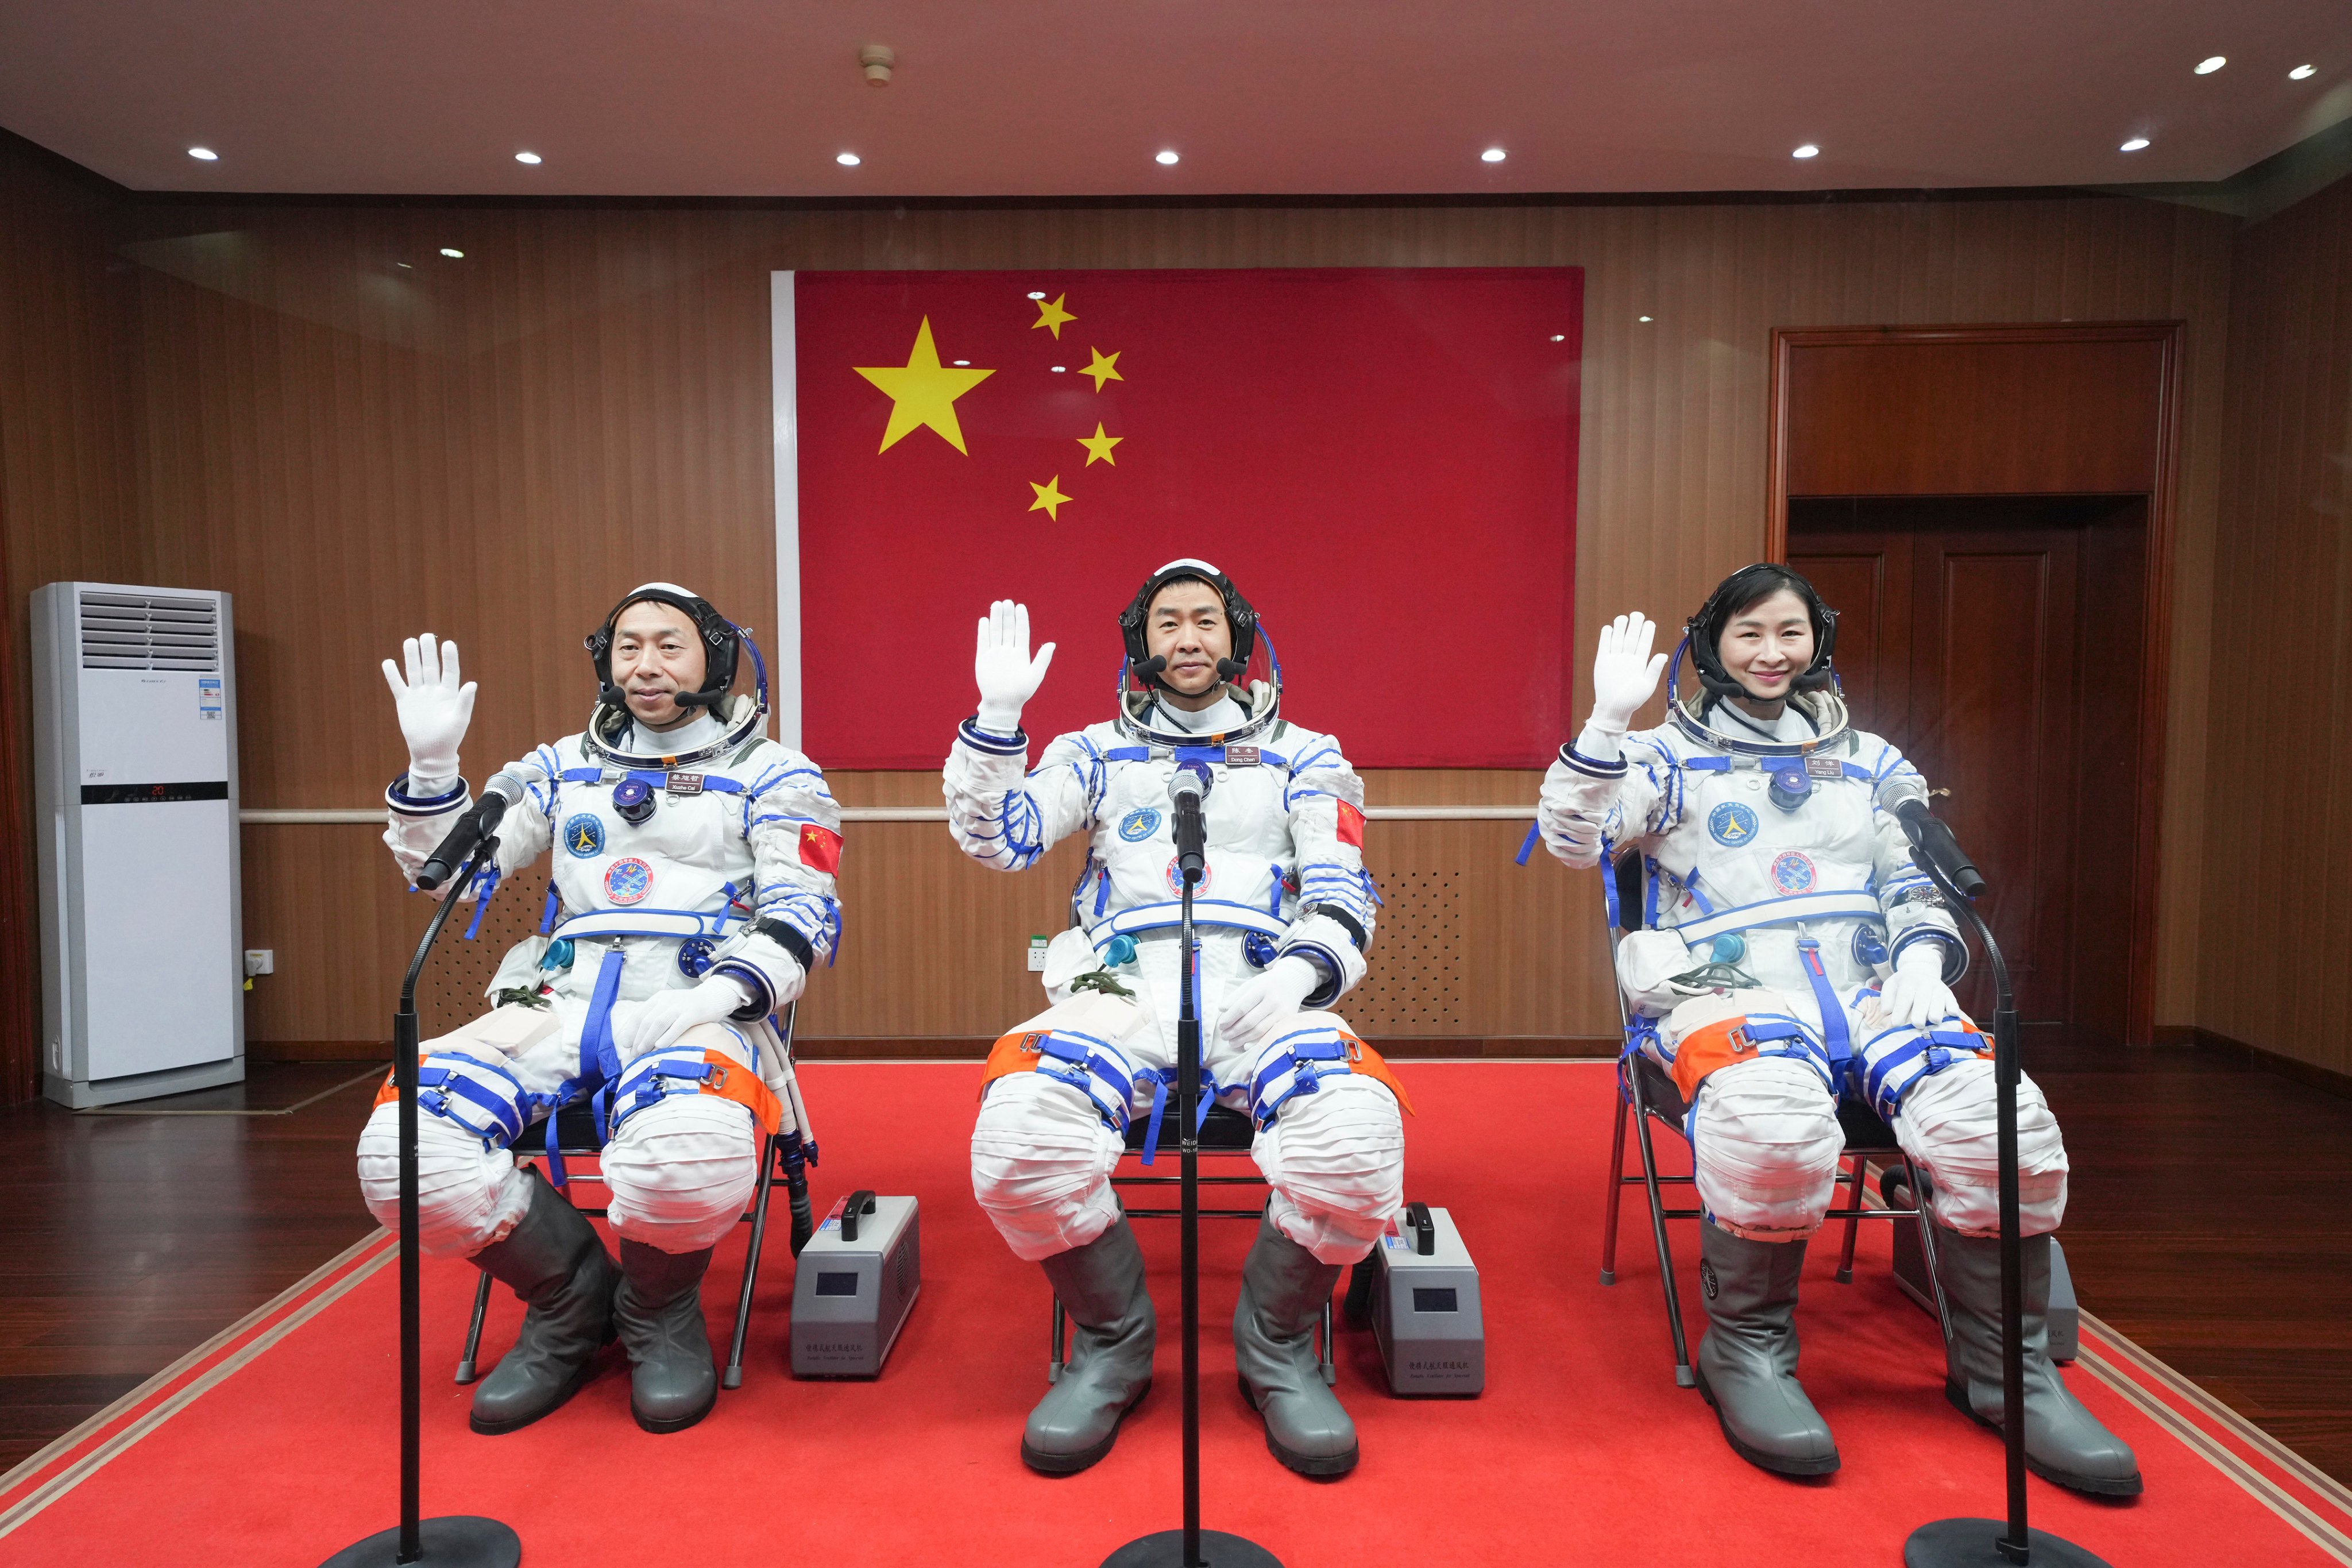 Liu Yang (right) became the first Chinese woman in space in 2012 as a crew member of Shenzhou-9. Photo: Xinhua